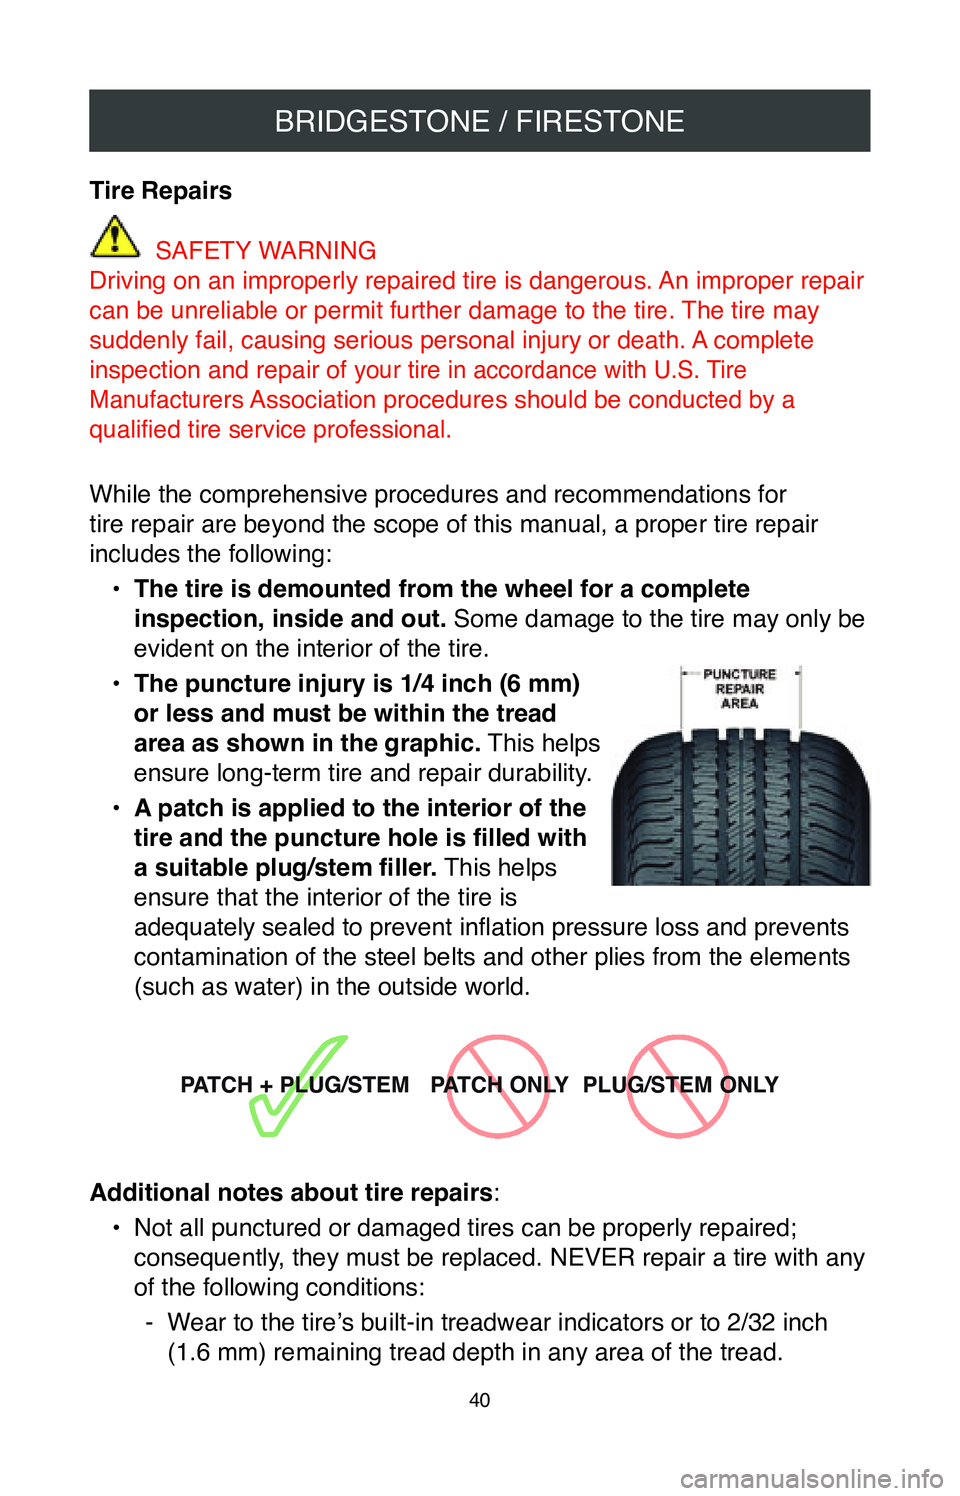 TOYOTA COROLLA 2020  Warranties & Maintenance Guides (in English) BRIDGESTONE / FIRESTONE
40
Tire Repairs
 SAFETY WARNING
Driving on an improperly repaired tire is dangerous. An improper repair 
can be unreliable or permit further damage to the tire. The tire may 
s